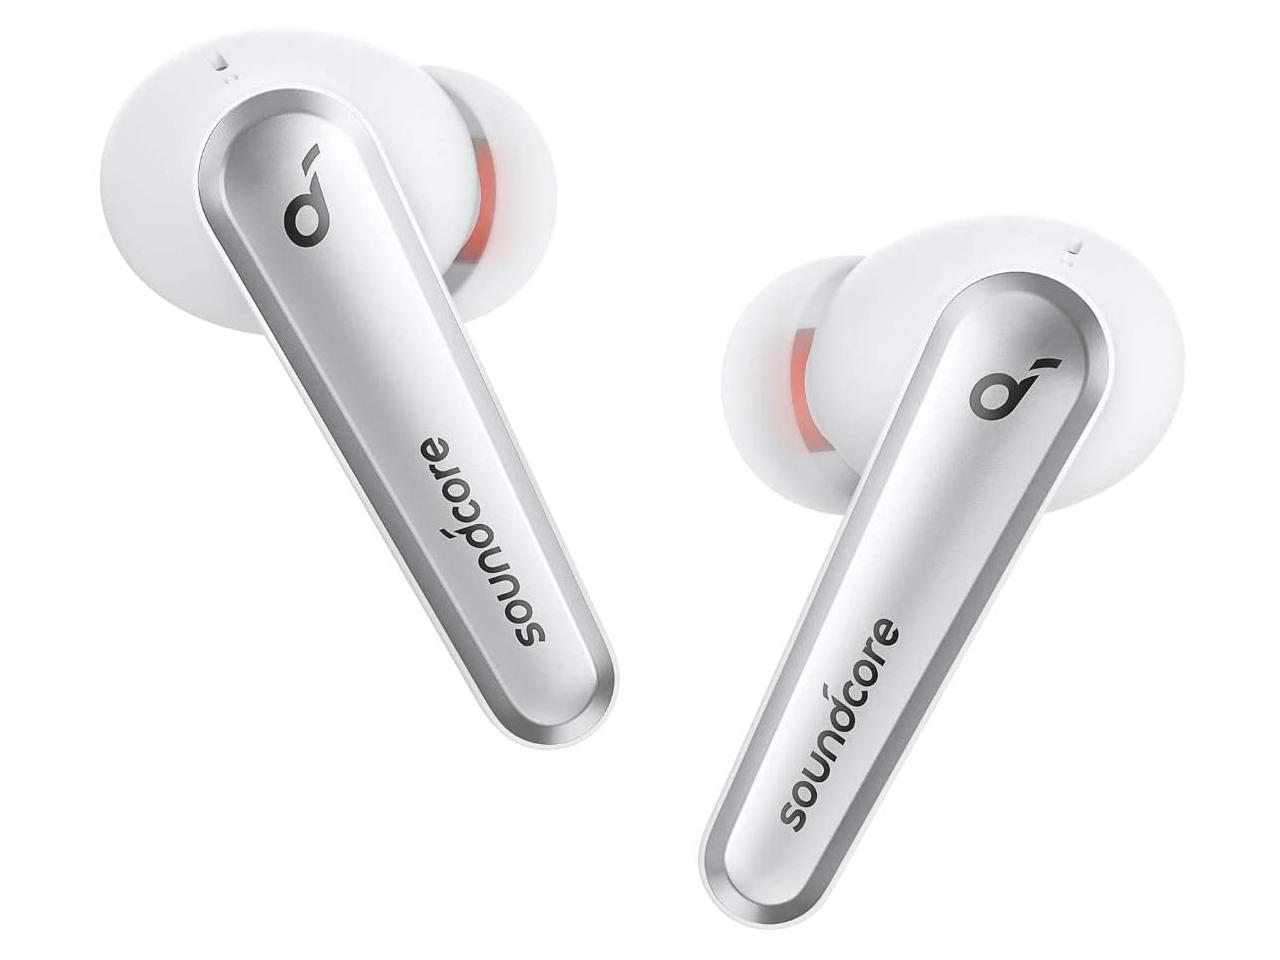 Anker Soundcore Liberty Air 2 Pro True ANC Wireless Earbuds *RFB* (Black | White) $50